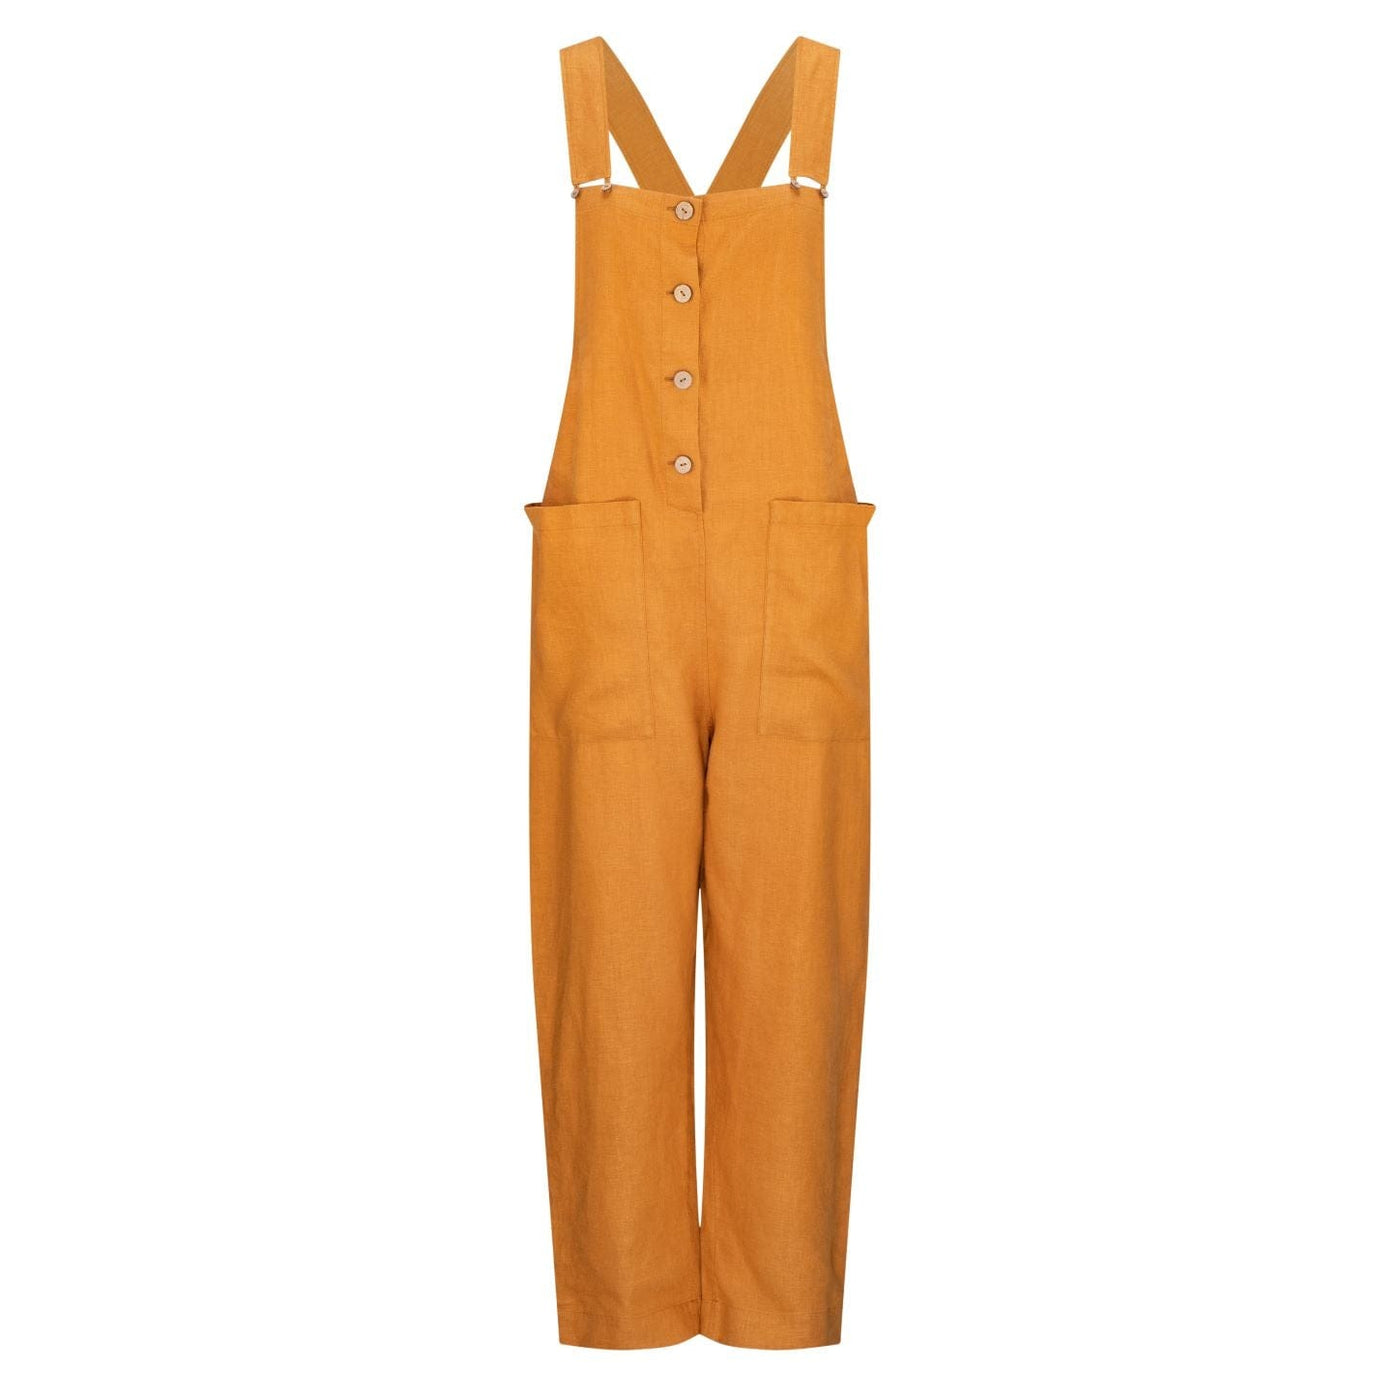 Lilly Pilly Collection 100% organic linen Piper Linen Jumpsuit in Nutmeg. 3D model showing front view.